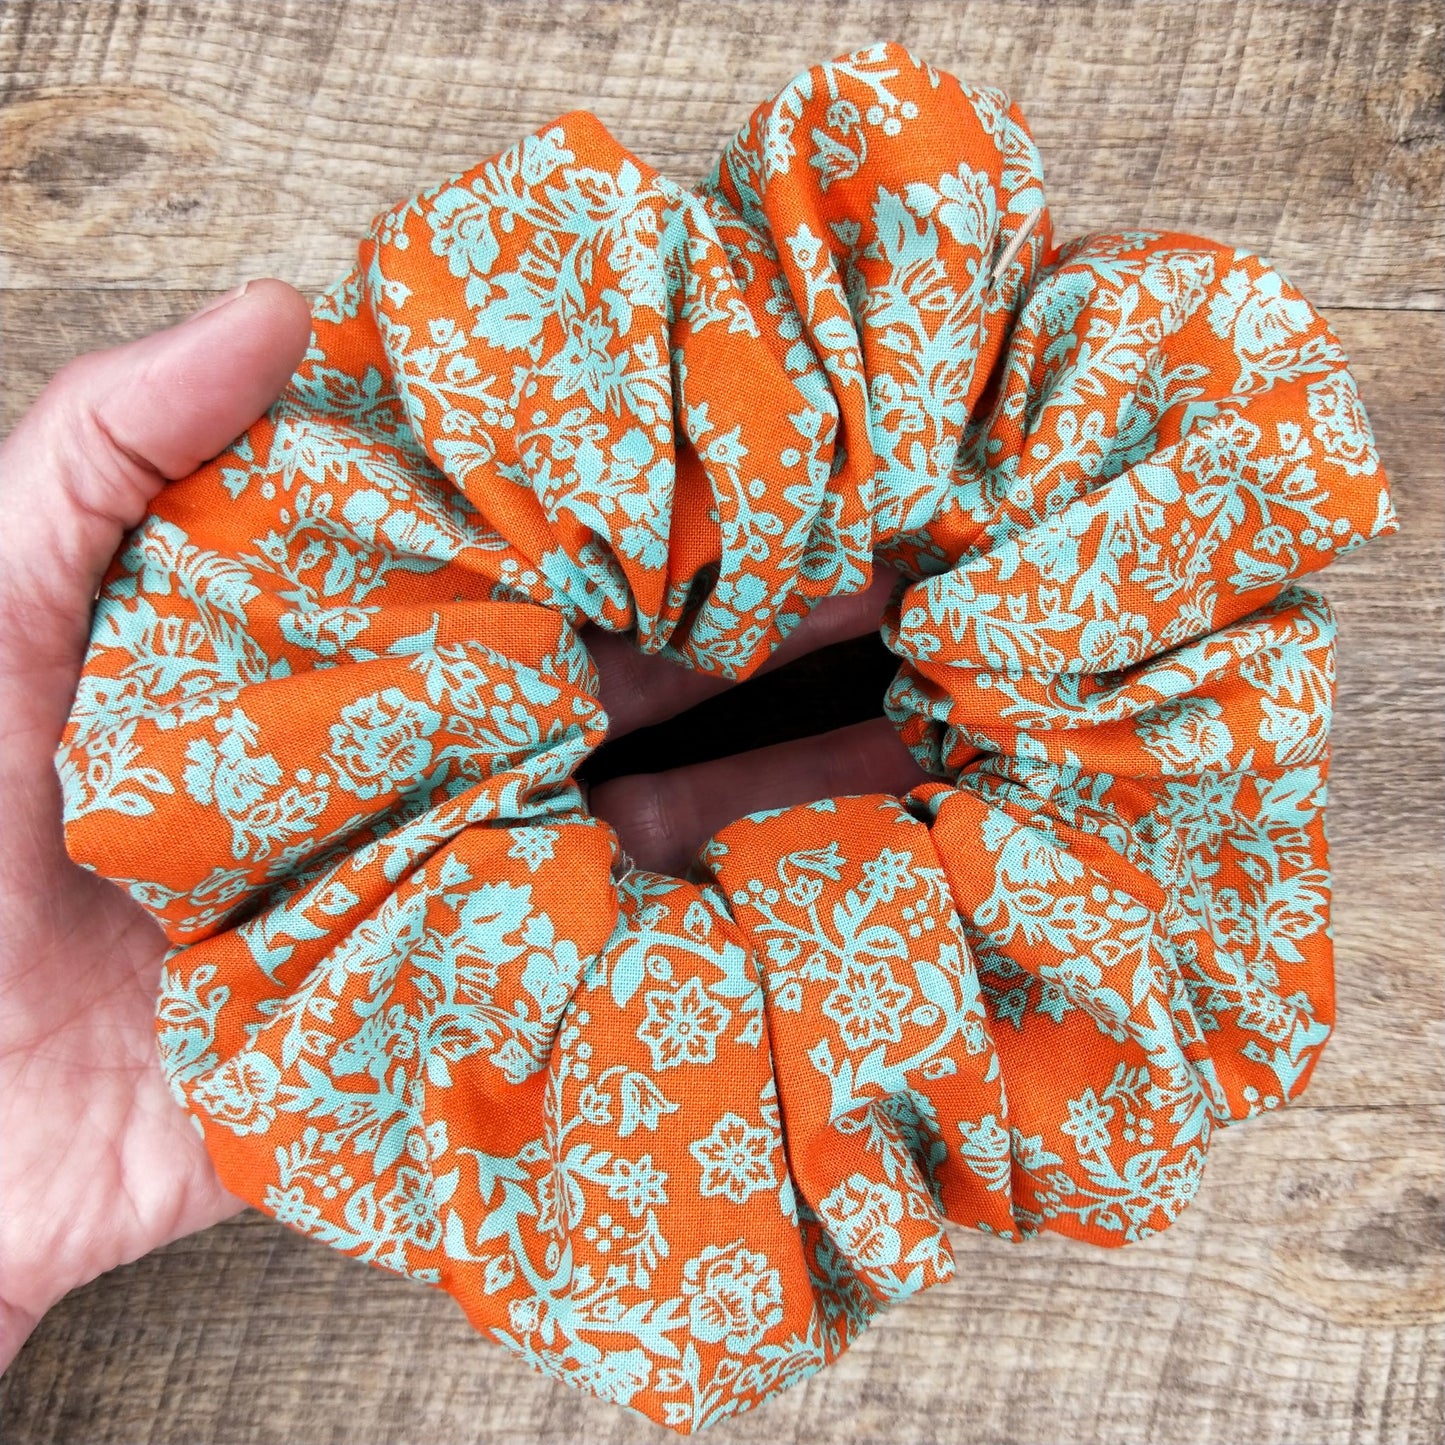 Scrunchies - Orange and Teal Floral